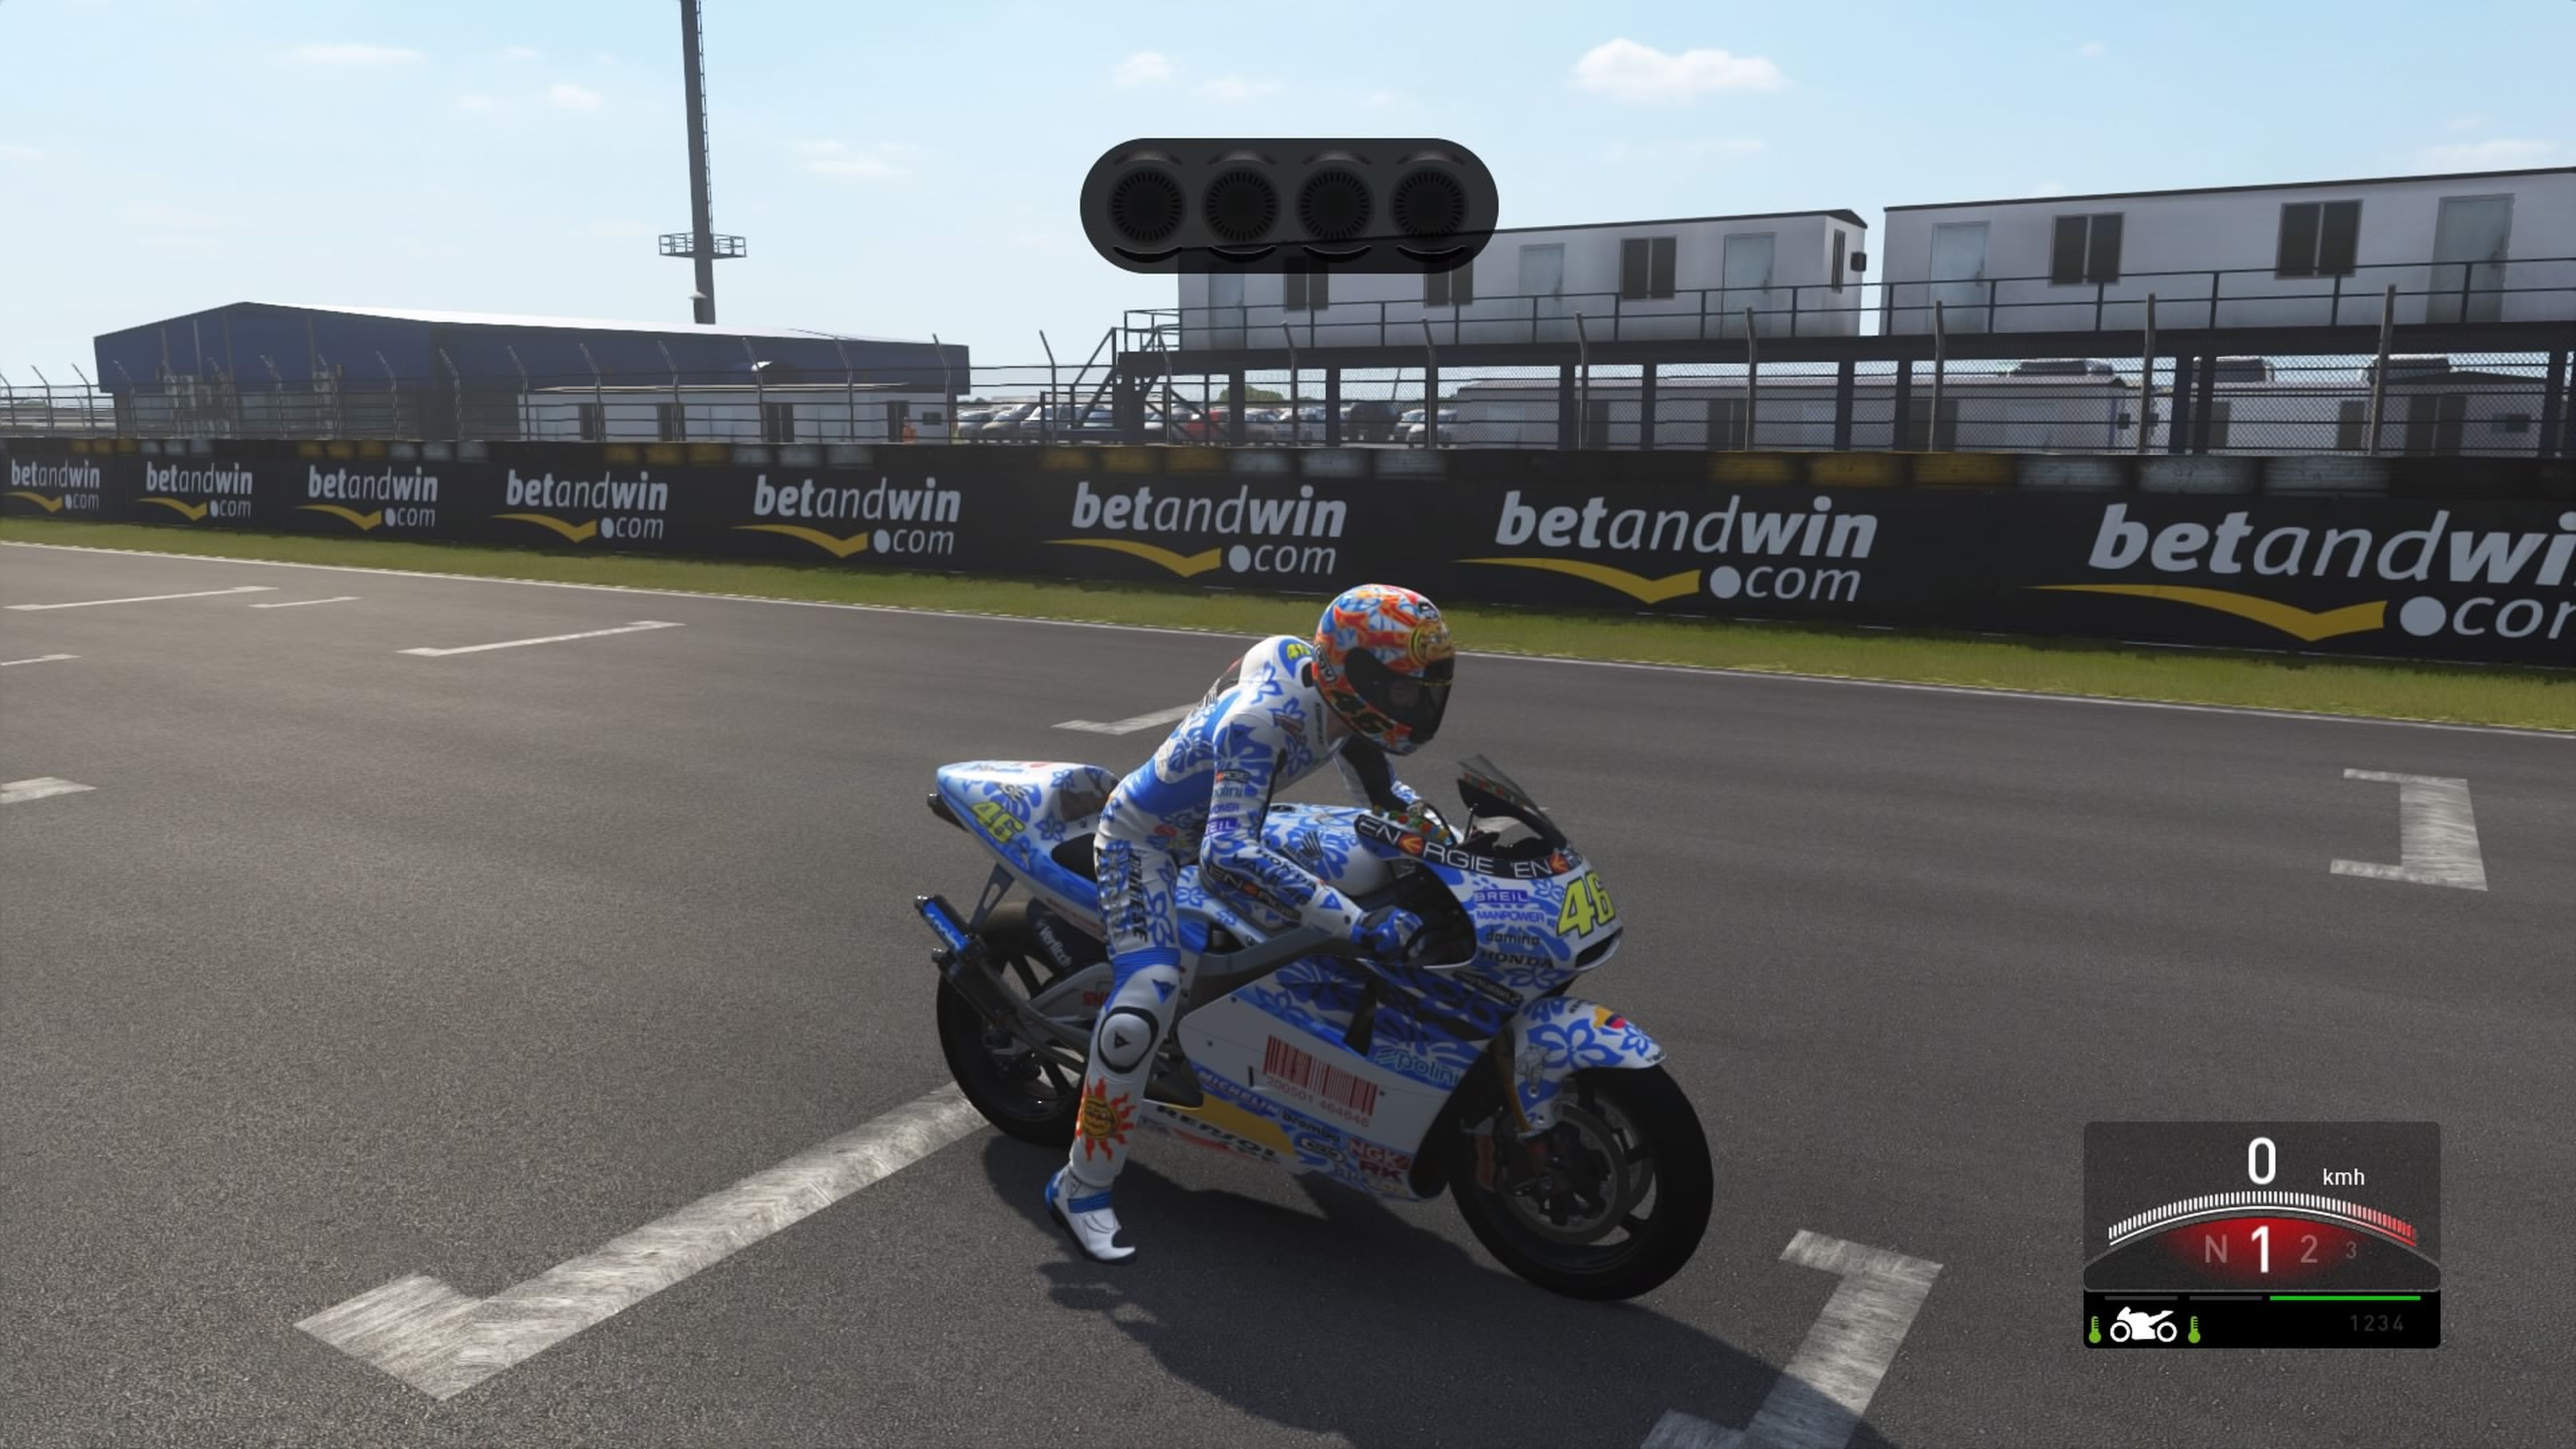 Valentino Rossi: The Game - Avance para PS4, Xbox One y PC